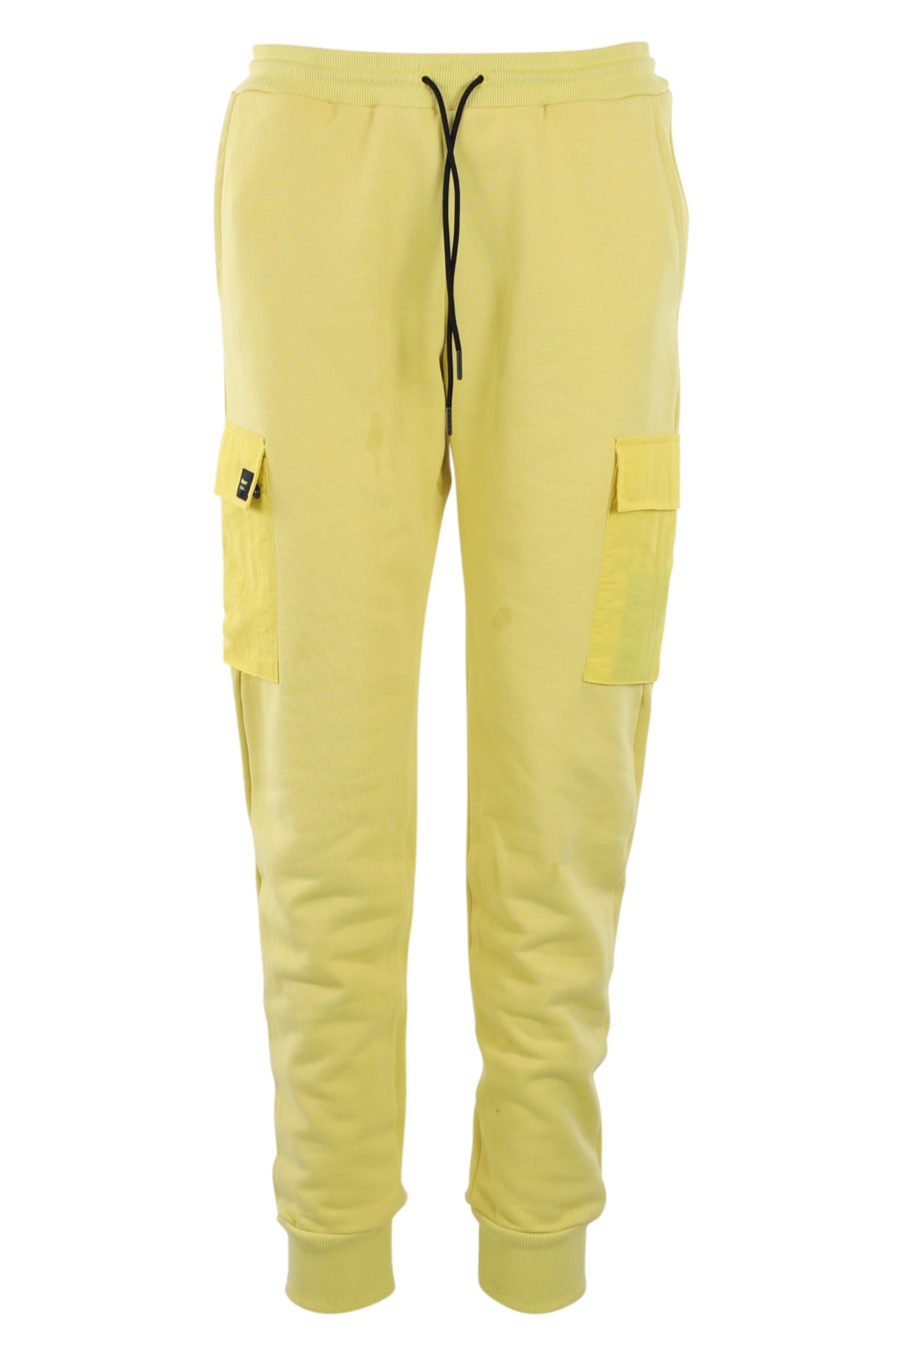 Yellow tracksuit bottoms with pockets - IMG 0903